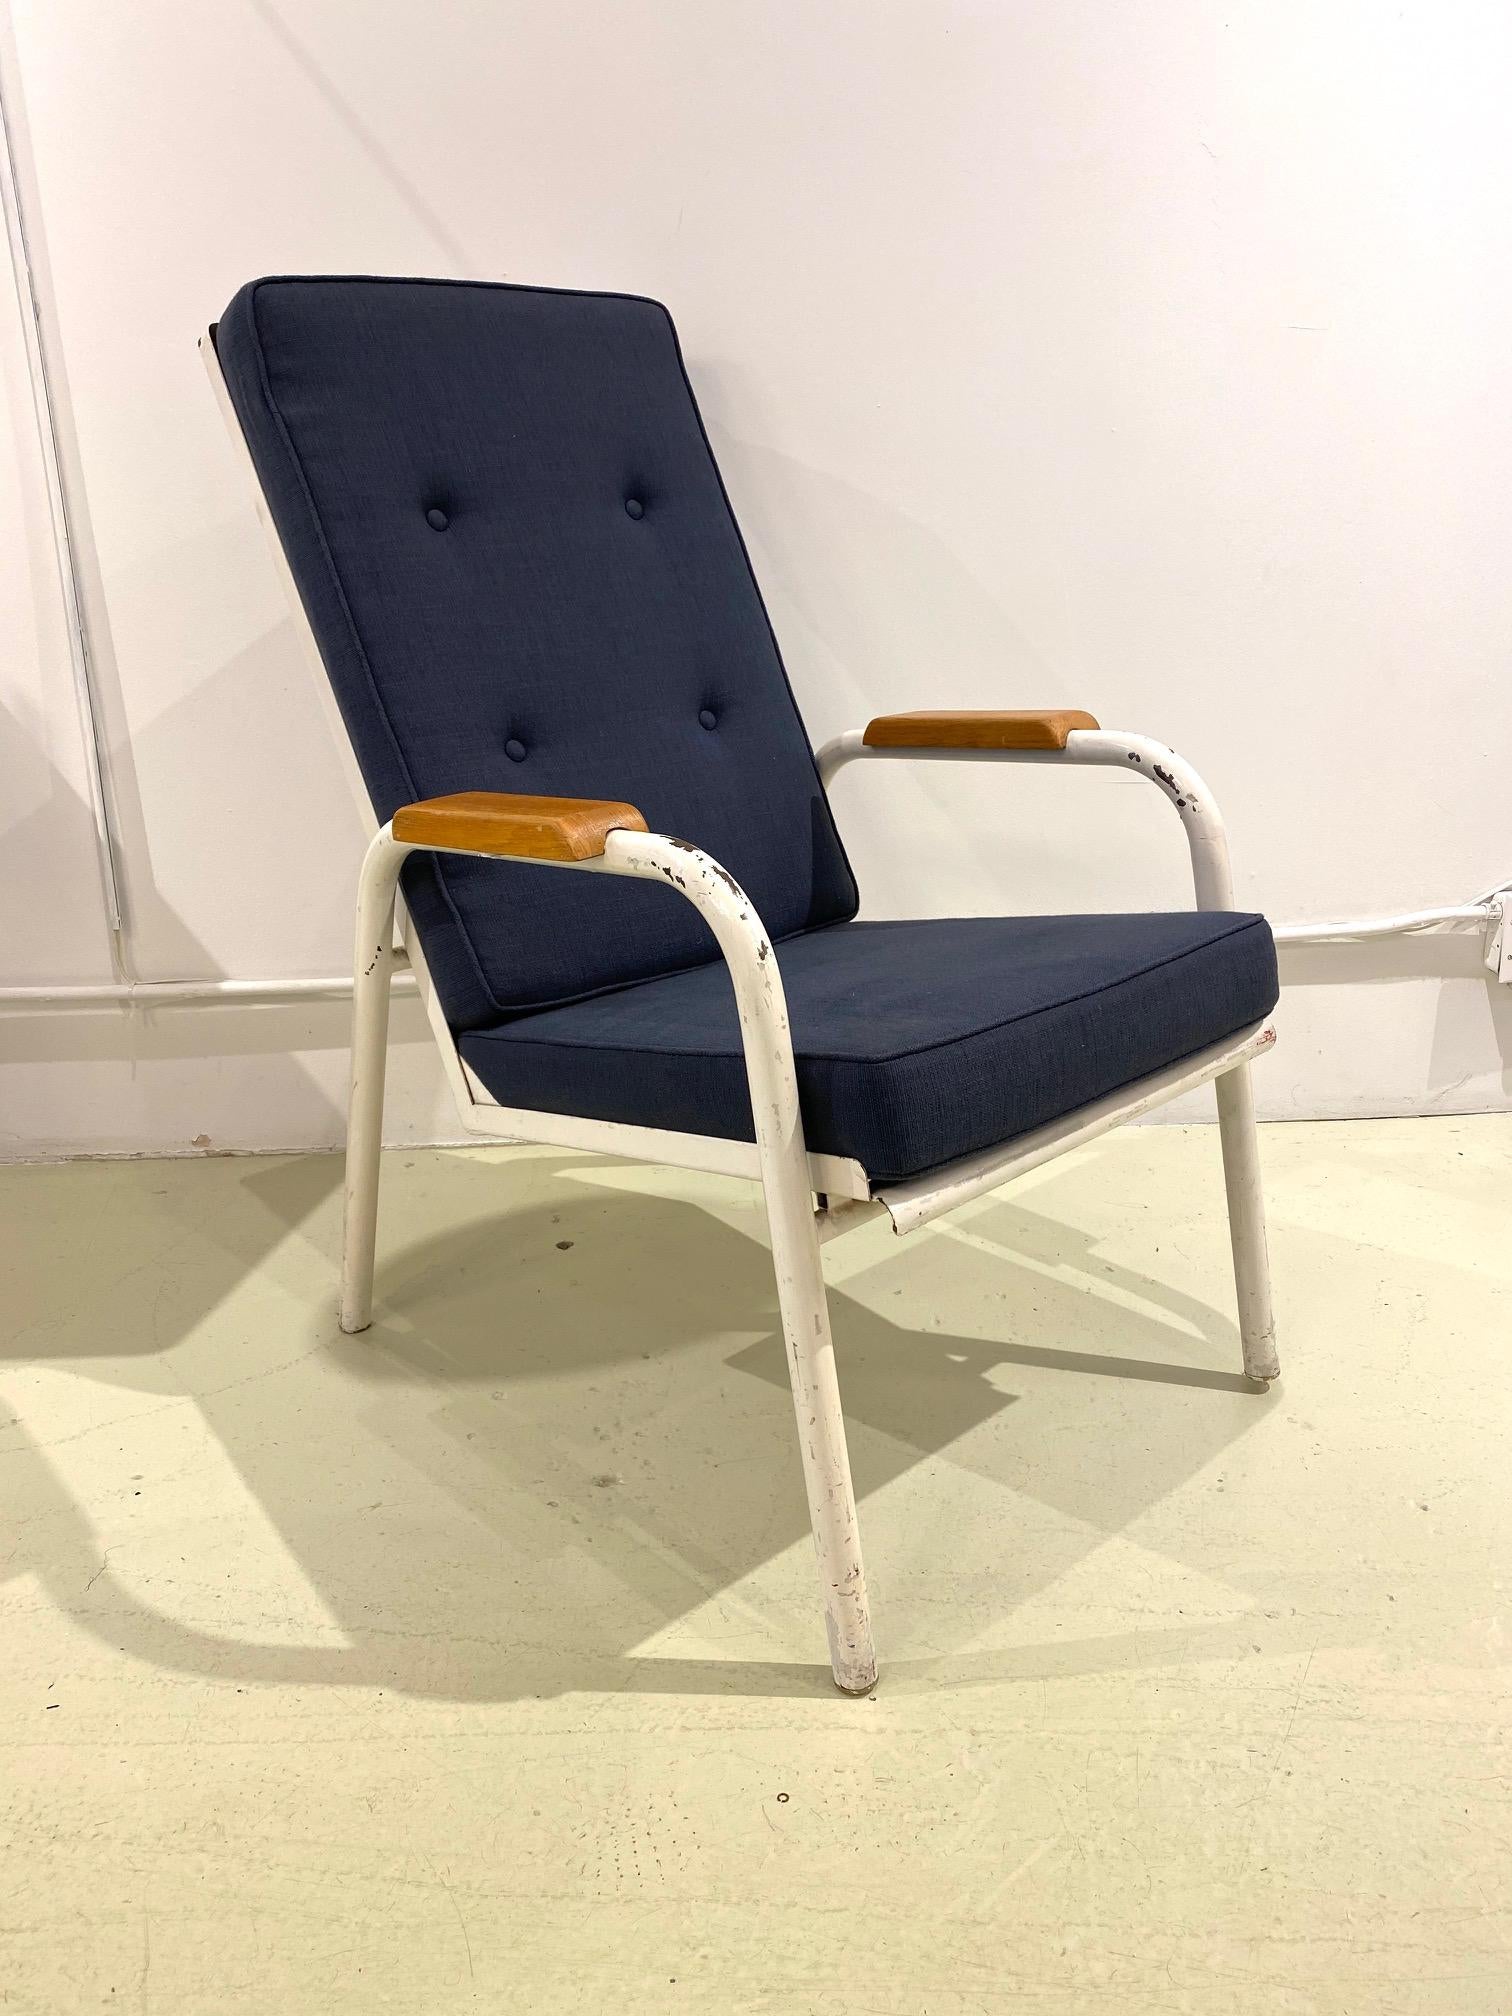 Lounge chair manufactured by Atelier Jean Prouve for Franco, U. S. Memorial hospital in Saint - Lo. From 1947 to 1949 Charlotte Perriand acted as interior architect consultant for all the interior furnishings.
Chair is in good original condition,